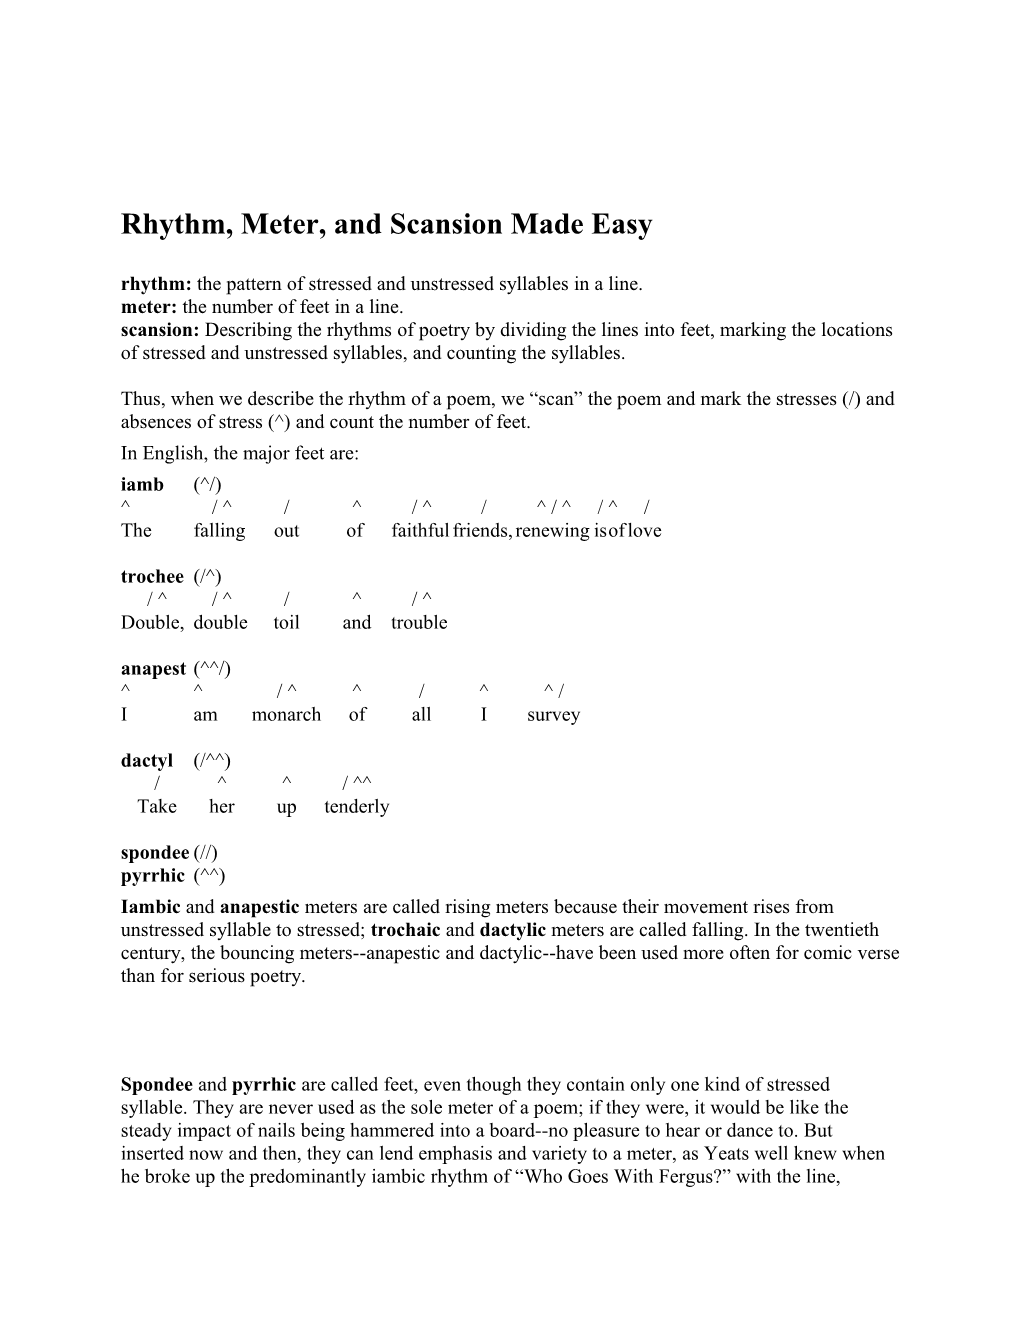 Rhythm, Meter, and Scansion Made Easy